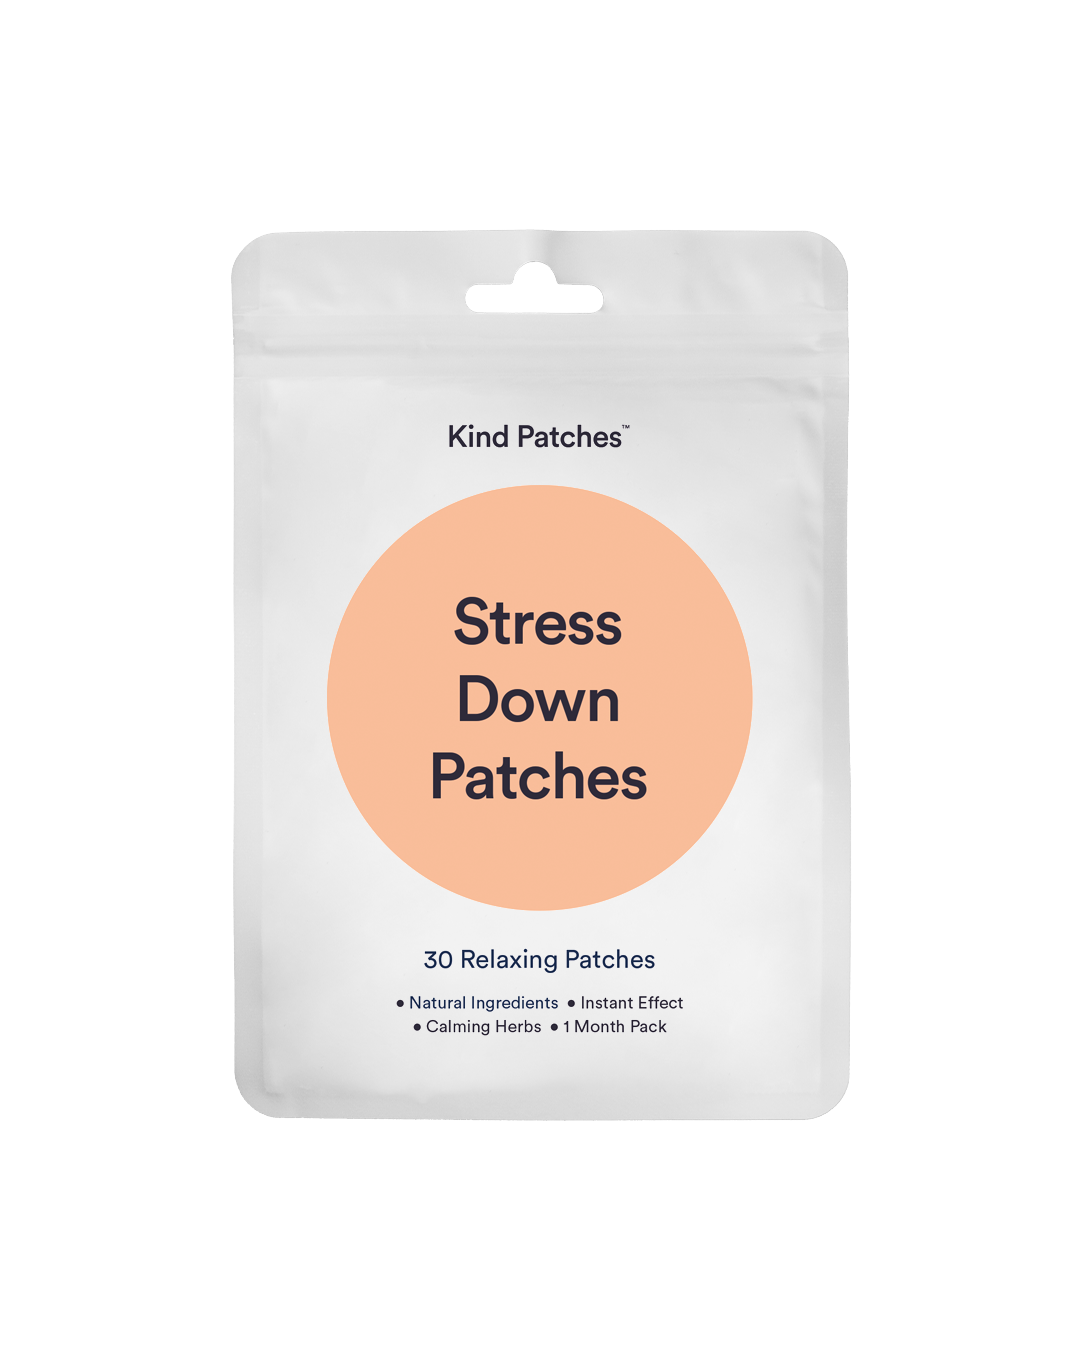 Stress Down Patches